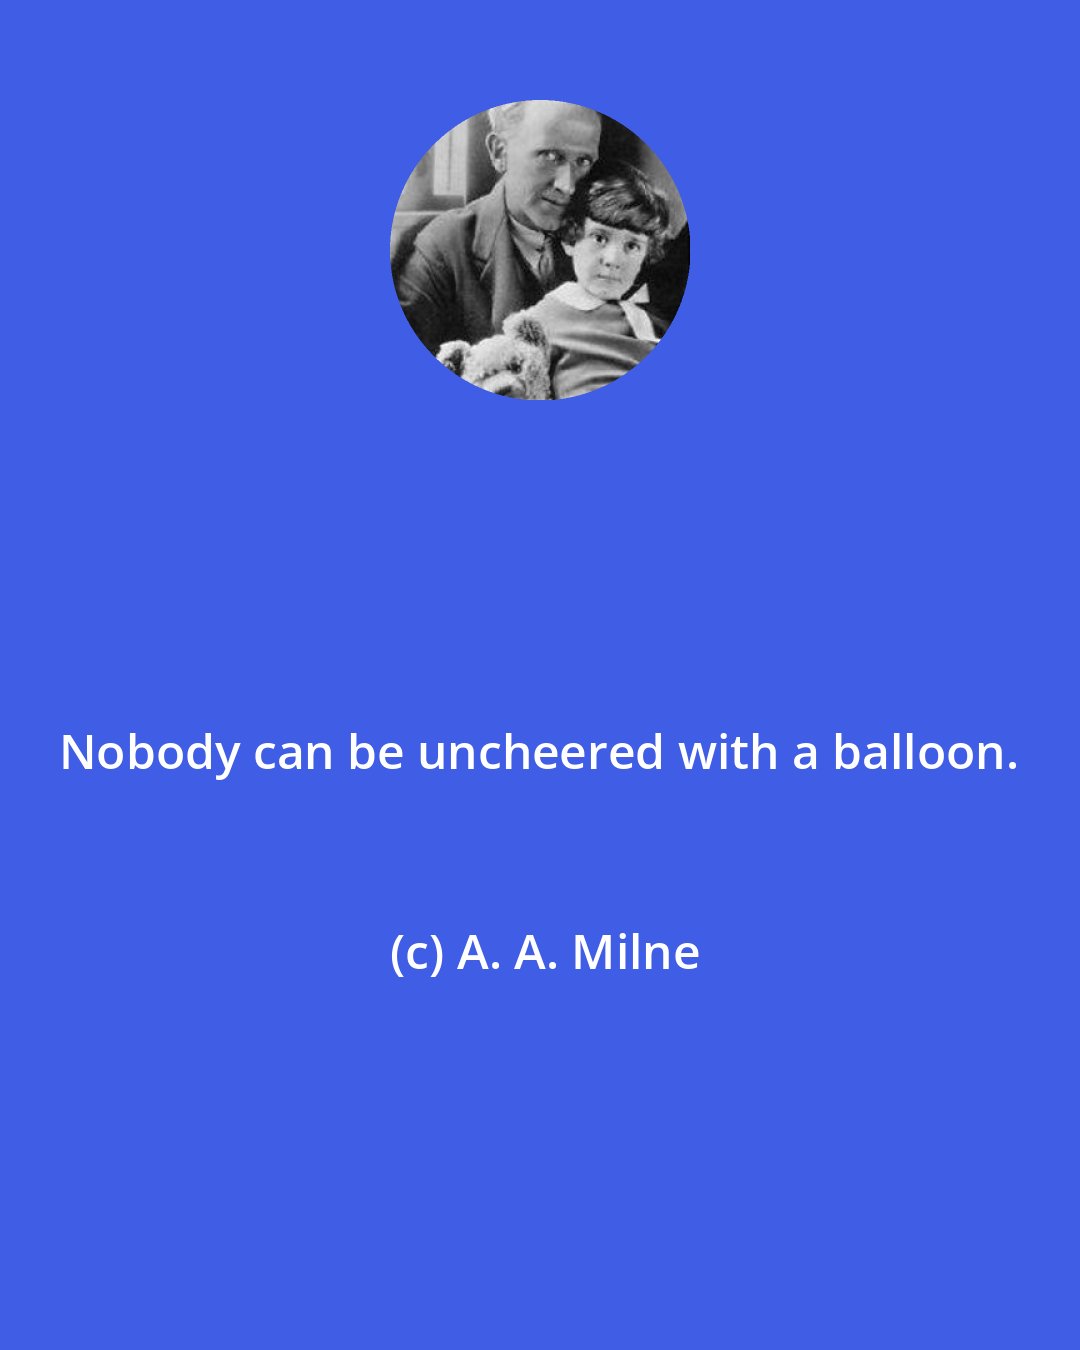 A. A. Milne: Nobody can be uncheered with a balloon.